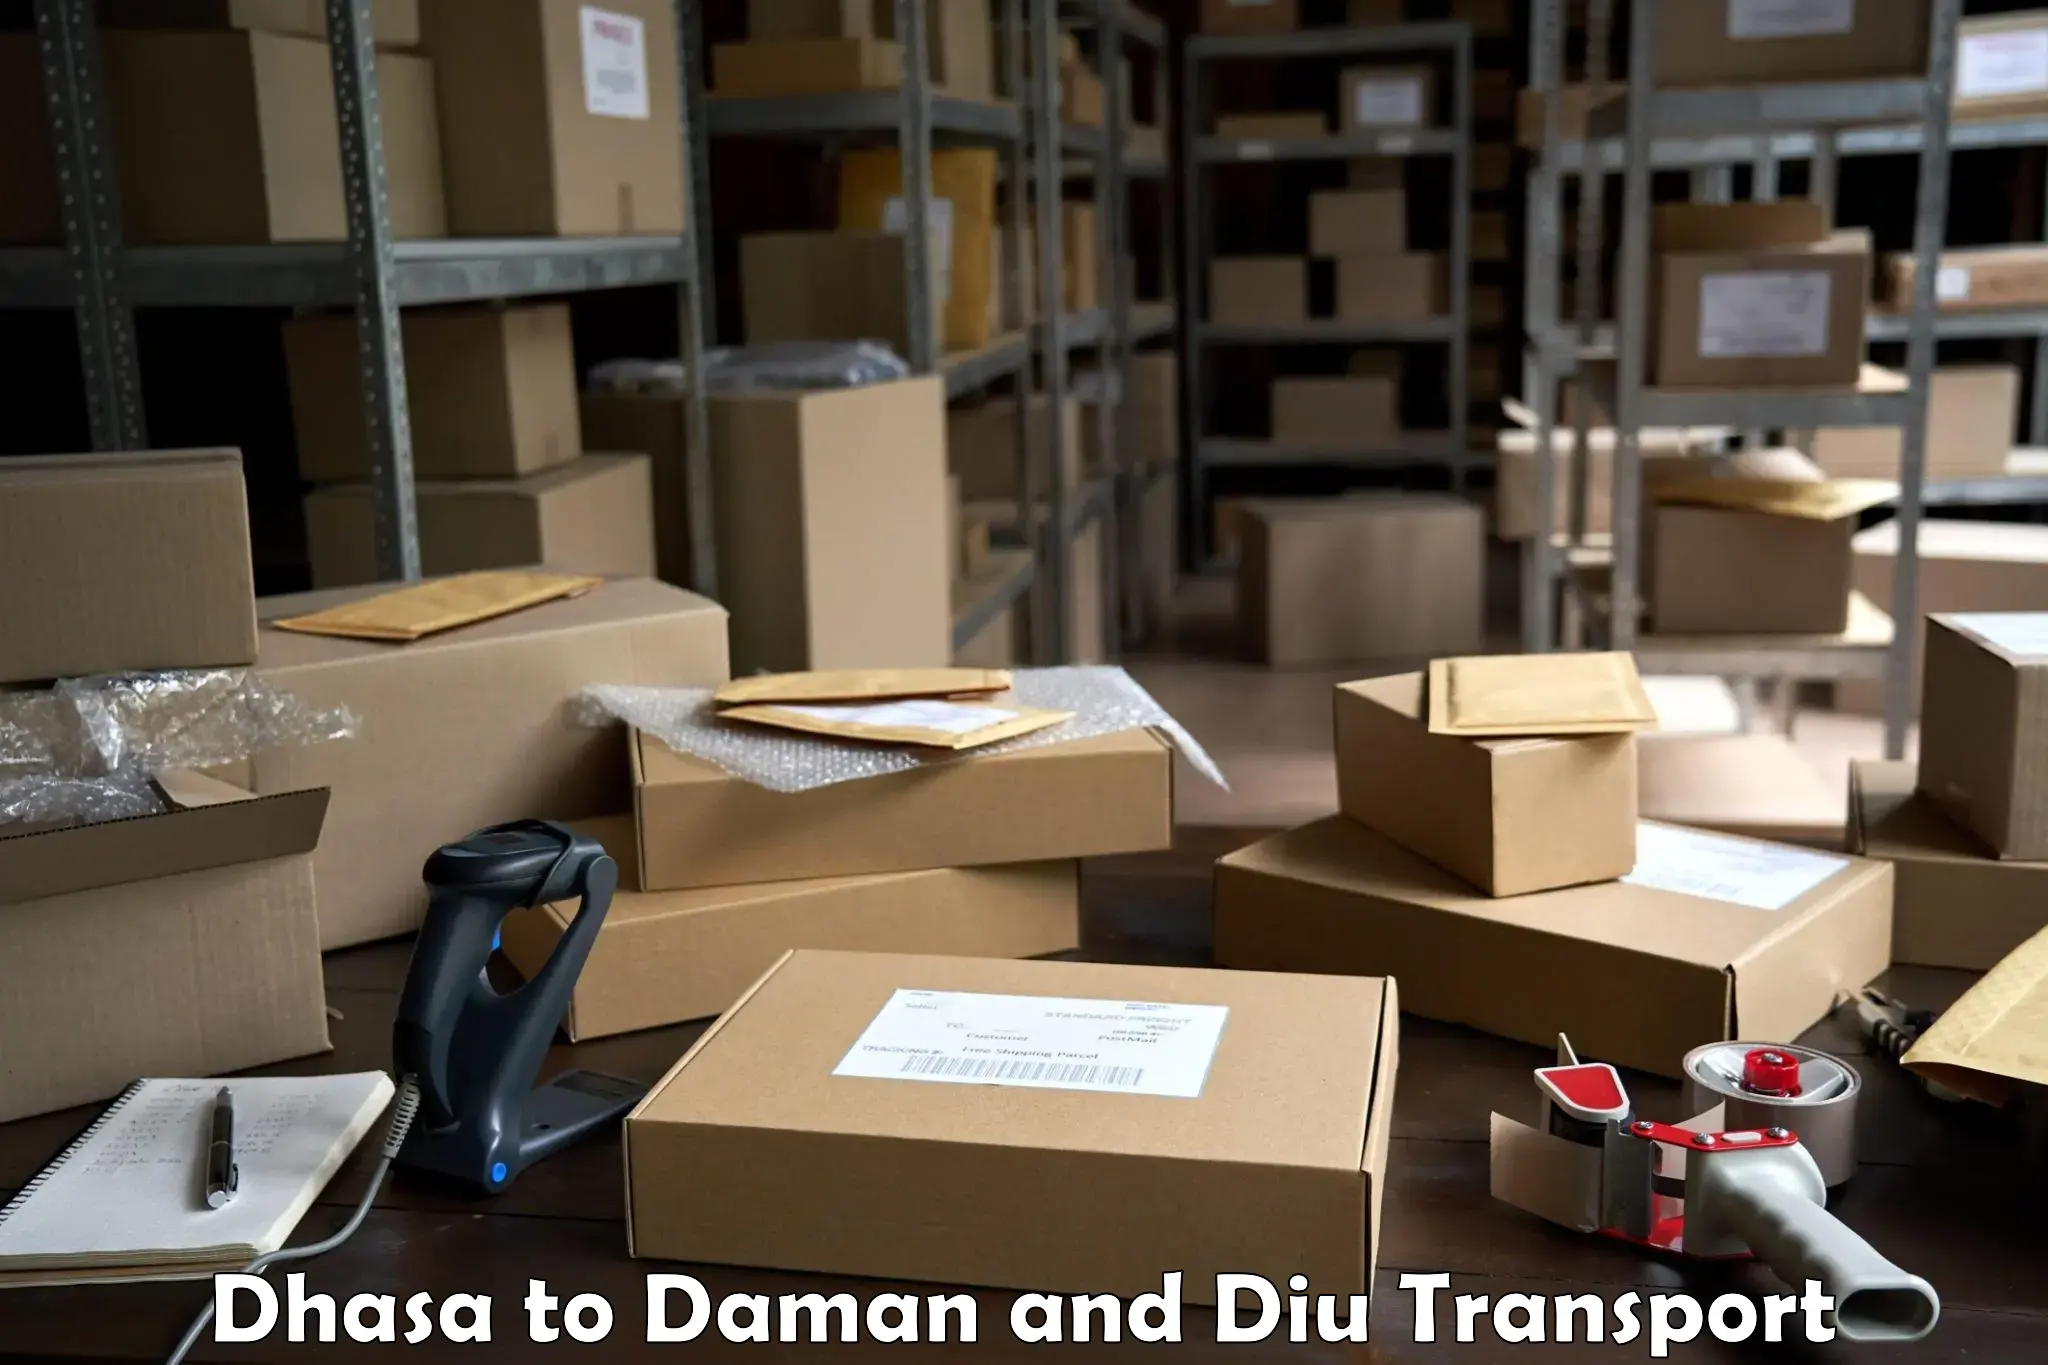 Road transport online services Dhasa to Daman and Diu